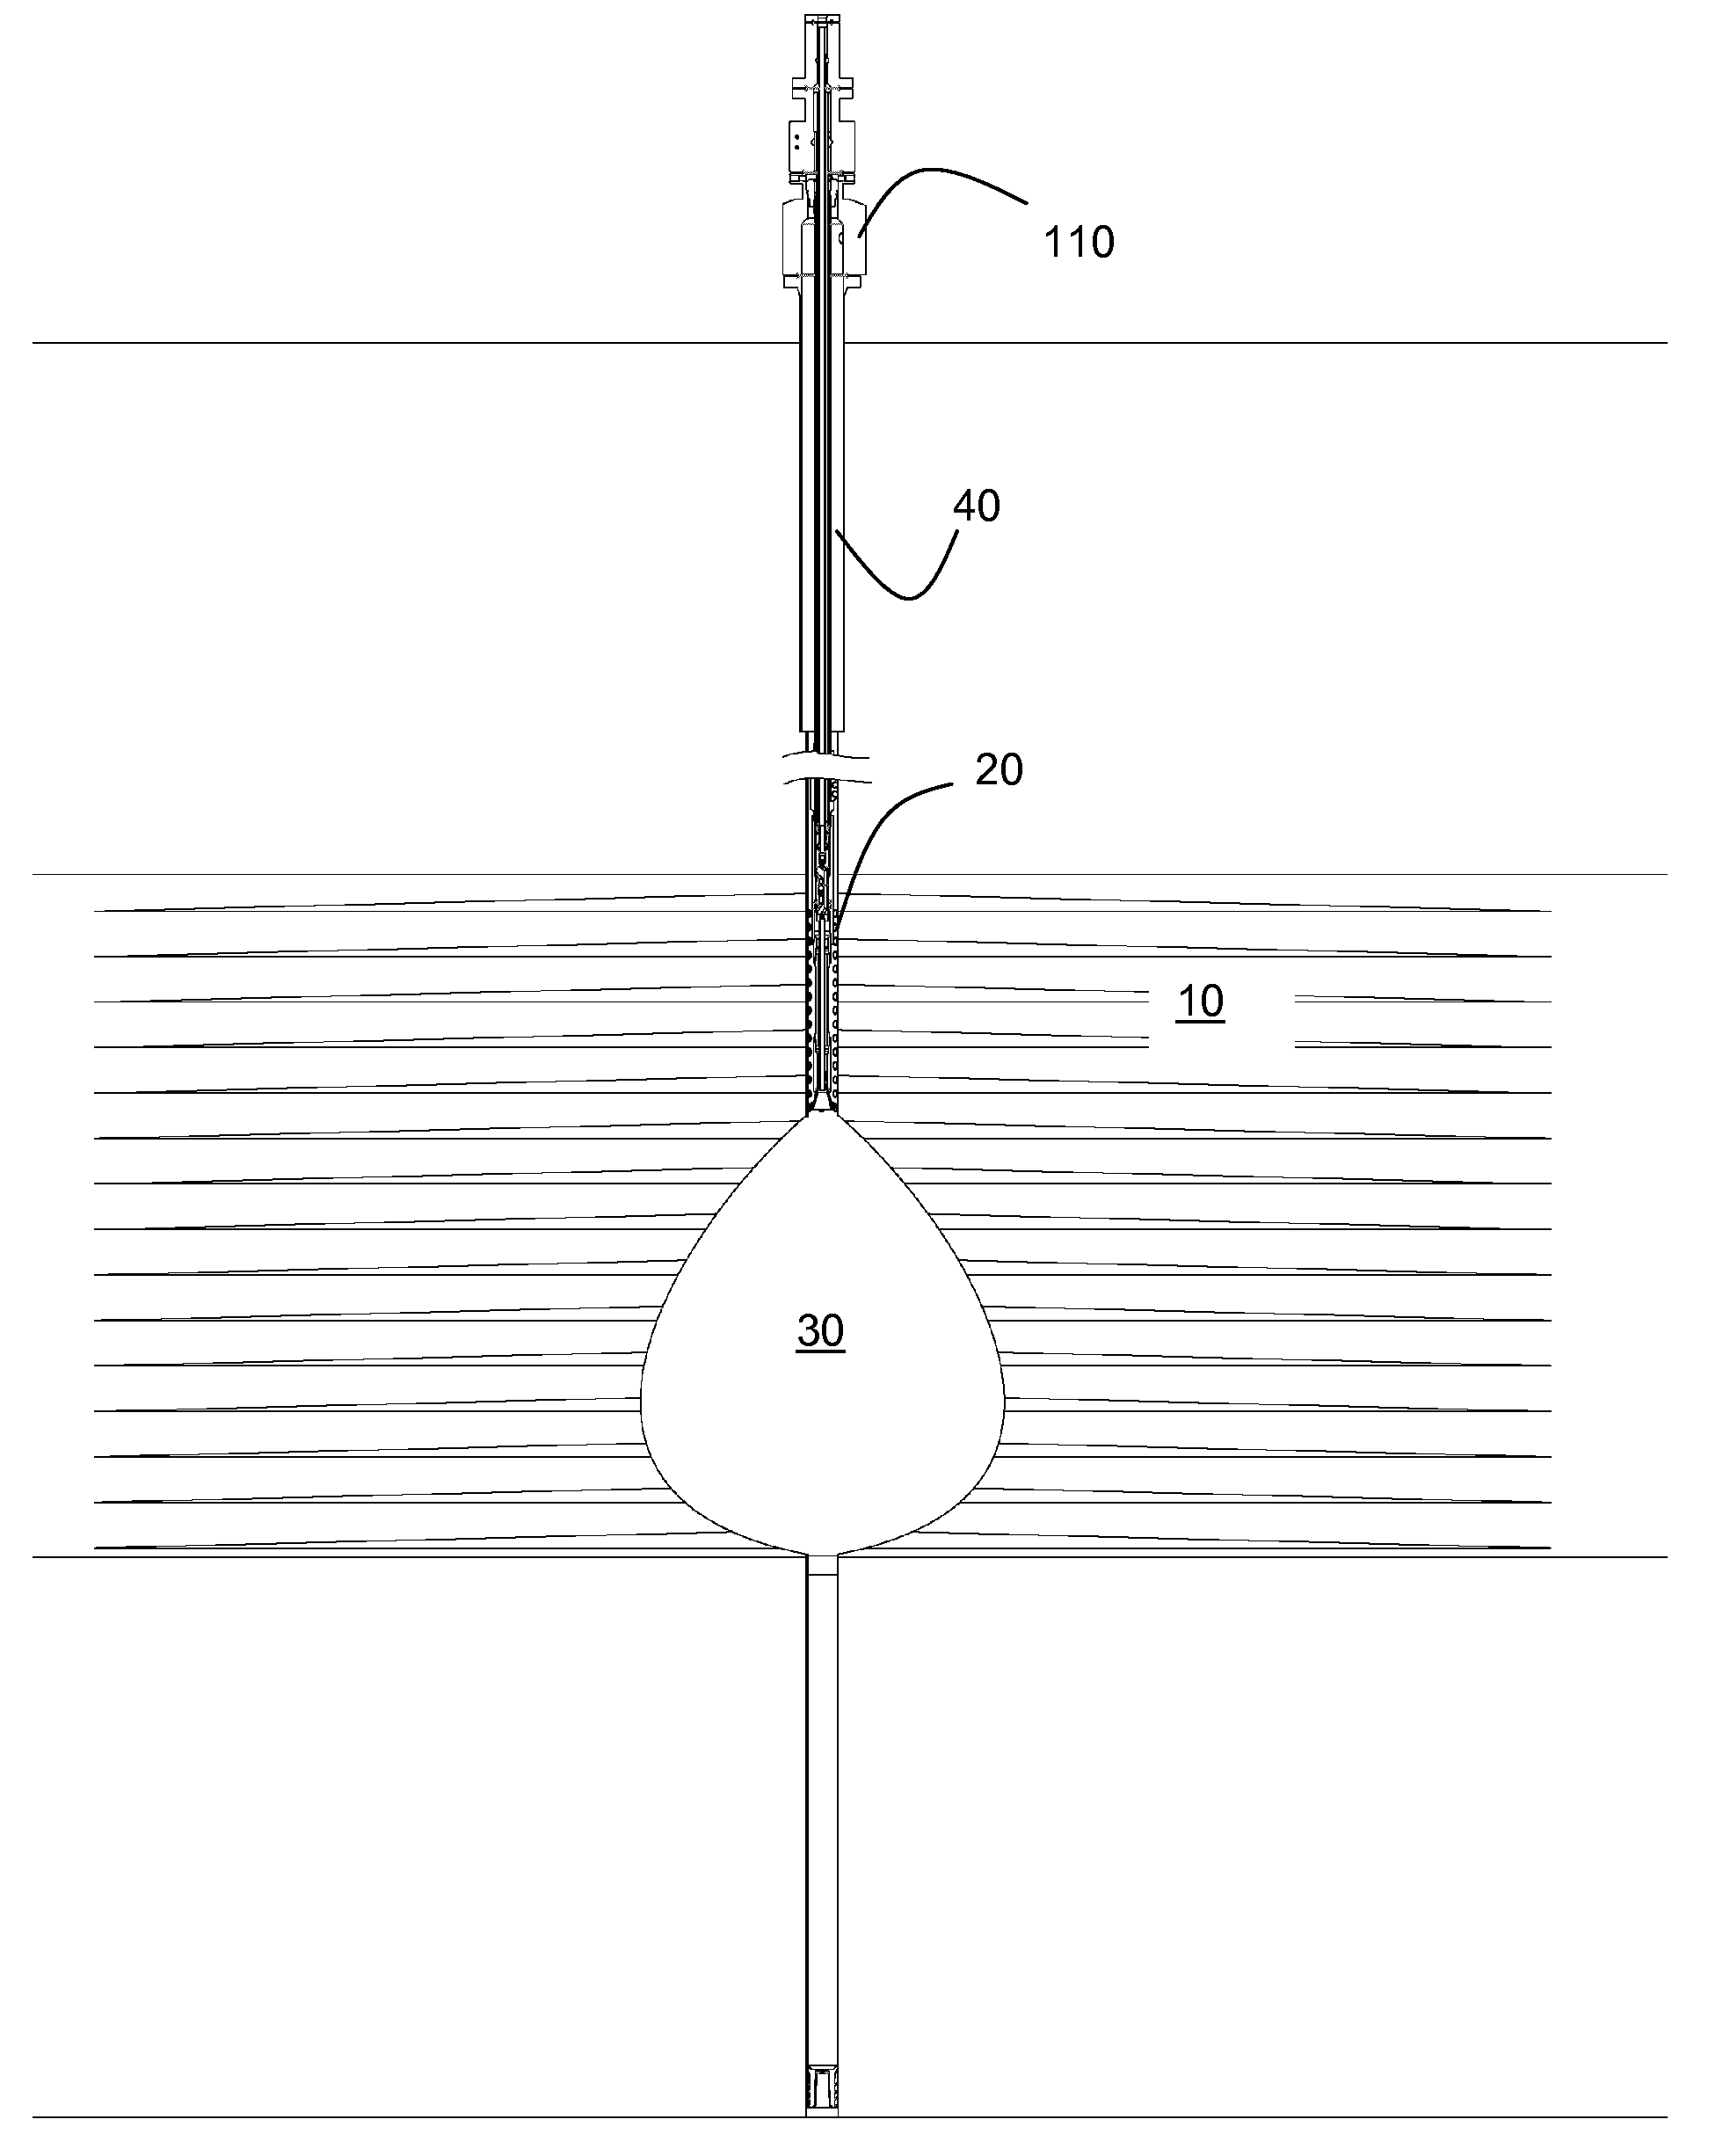 Apparatus and method for downhole steam generation and enhanced oil recovery